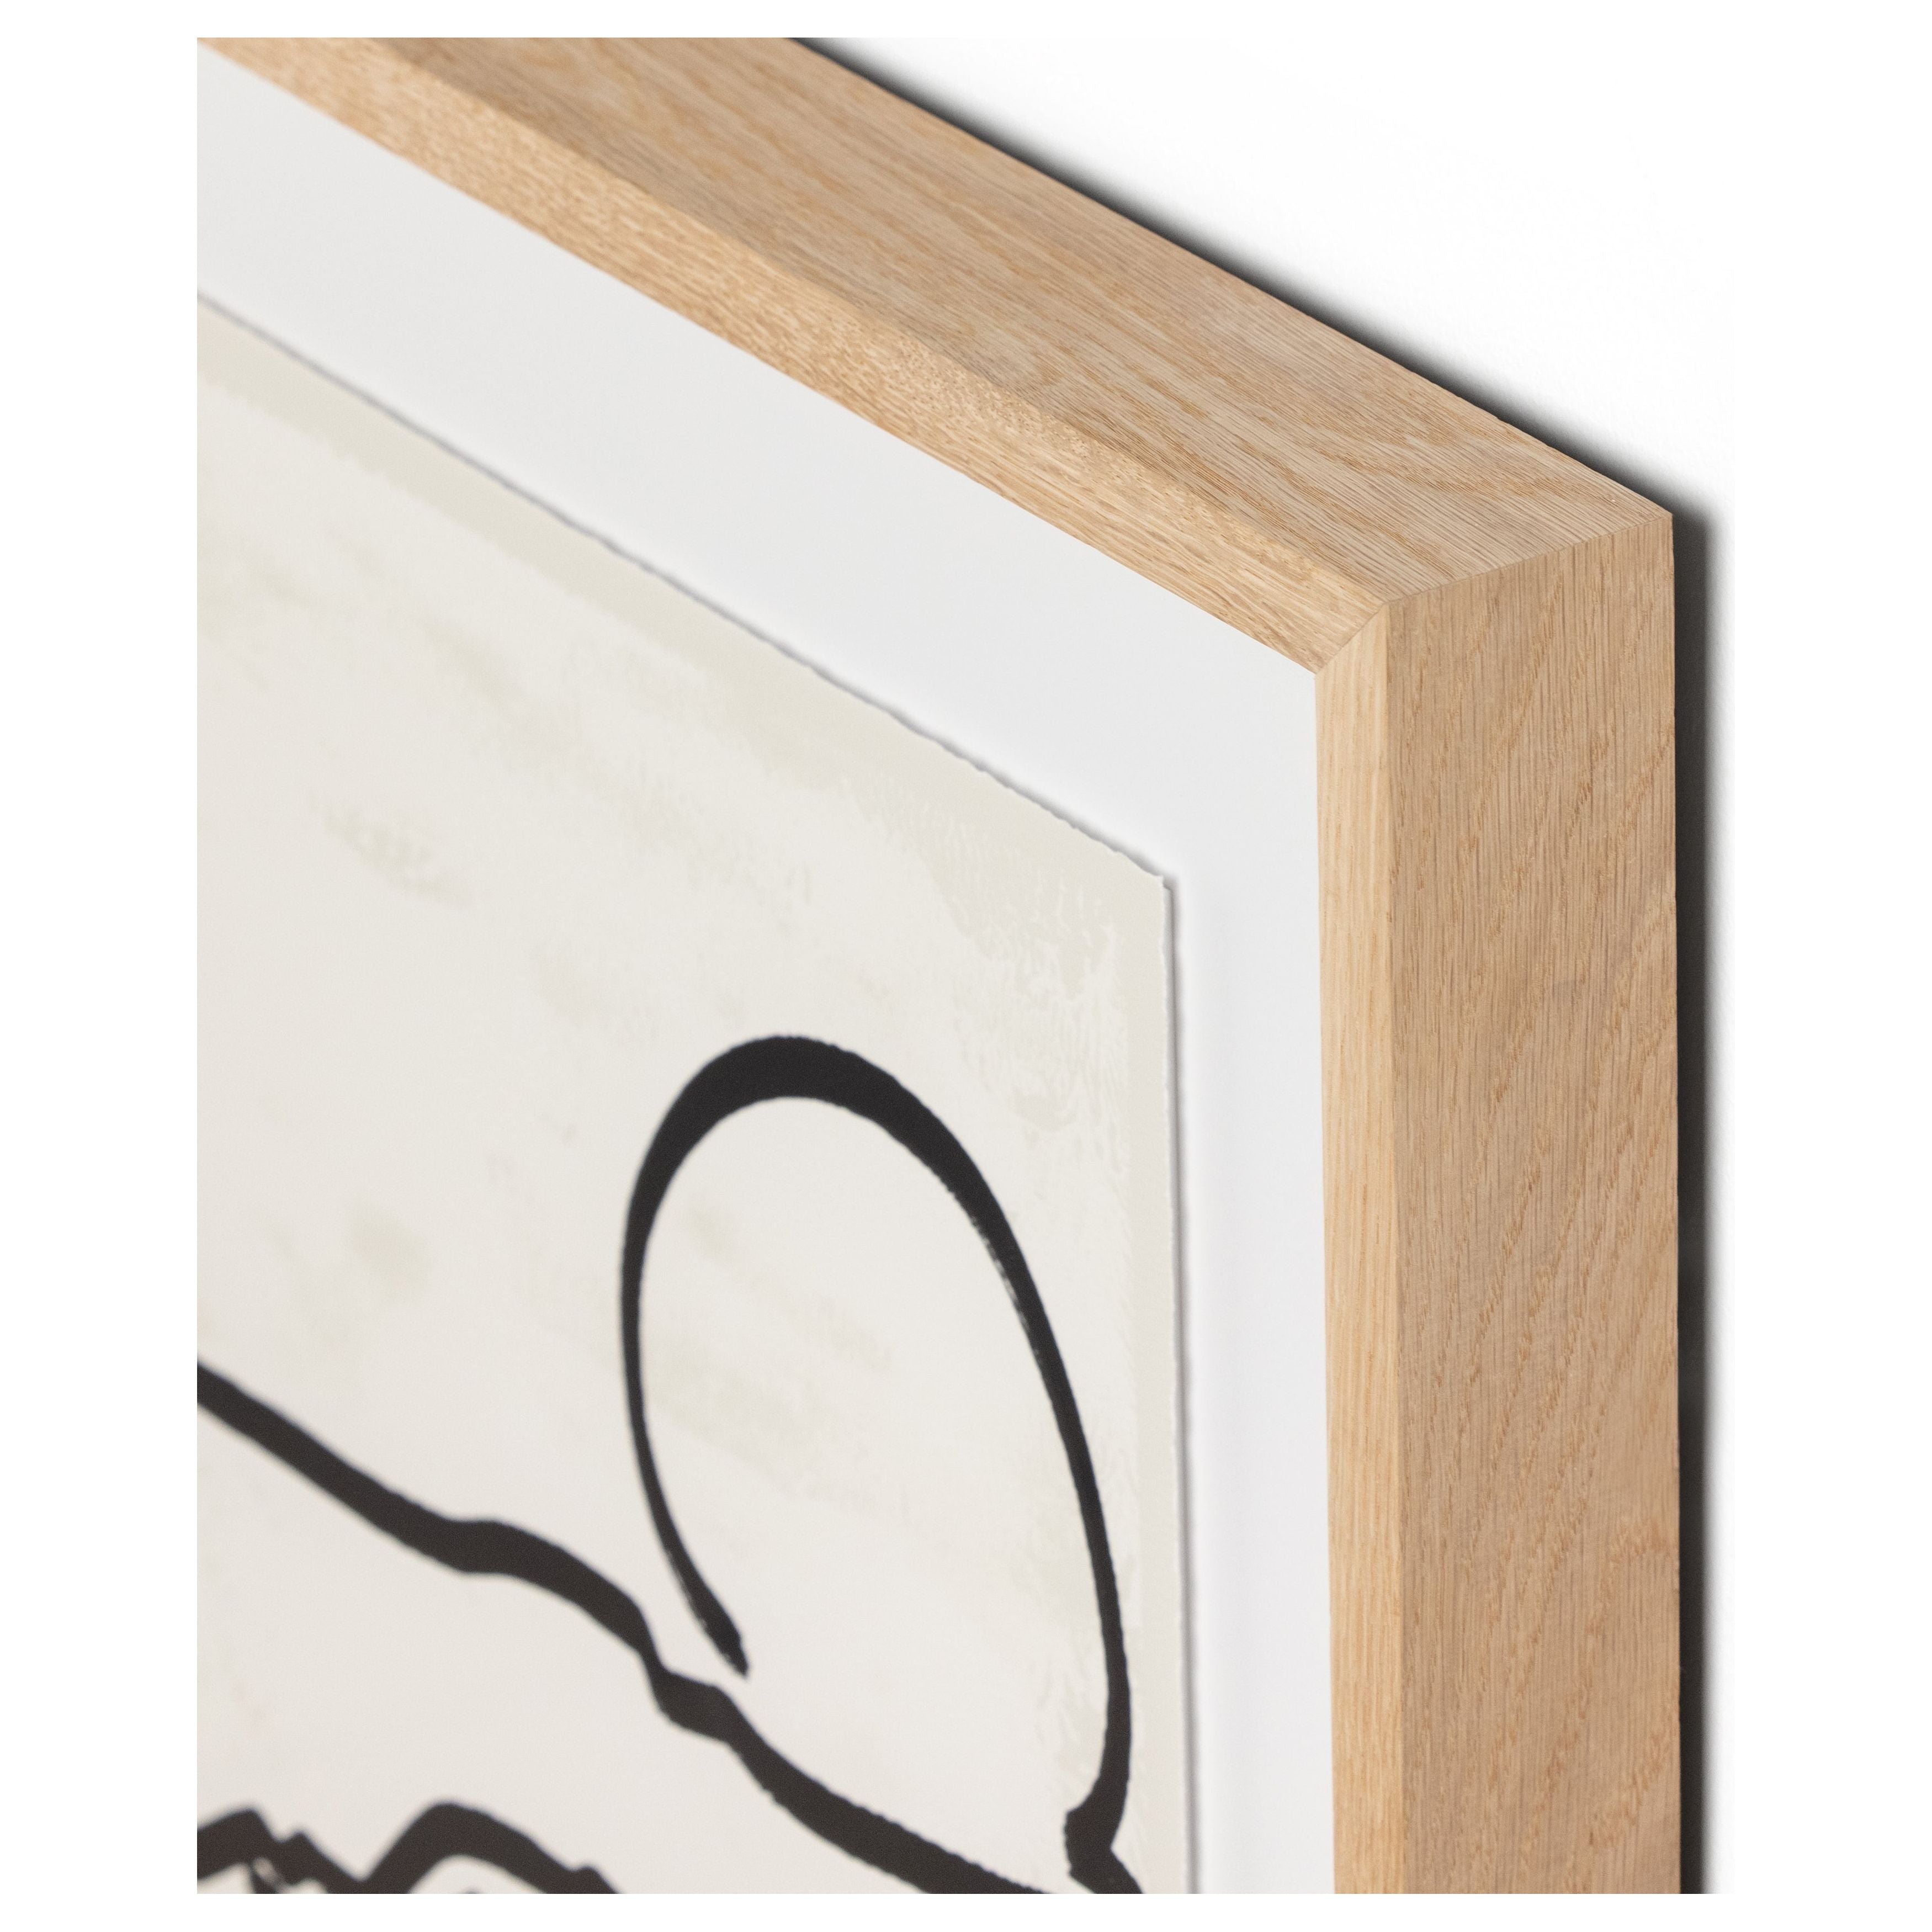 We love the clean contrast Mountain High I Art bings to a space. Original rendering by Bangkok-based art house Coup D'Esprit, this is framed within vertical grain white oak for a museum-quality look.